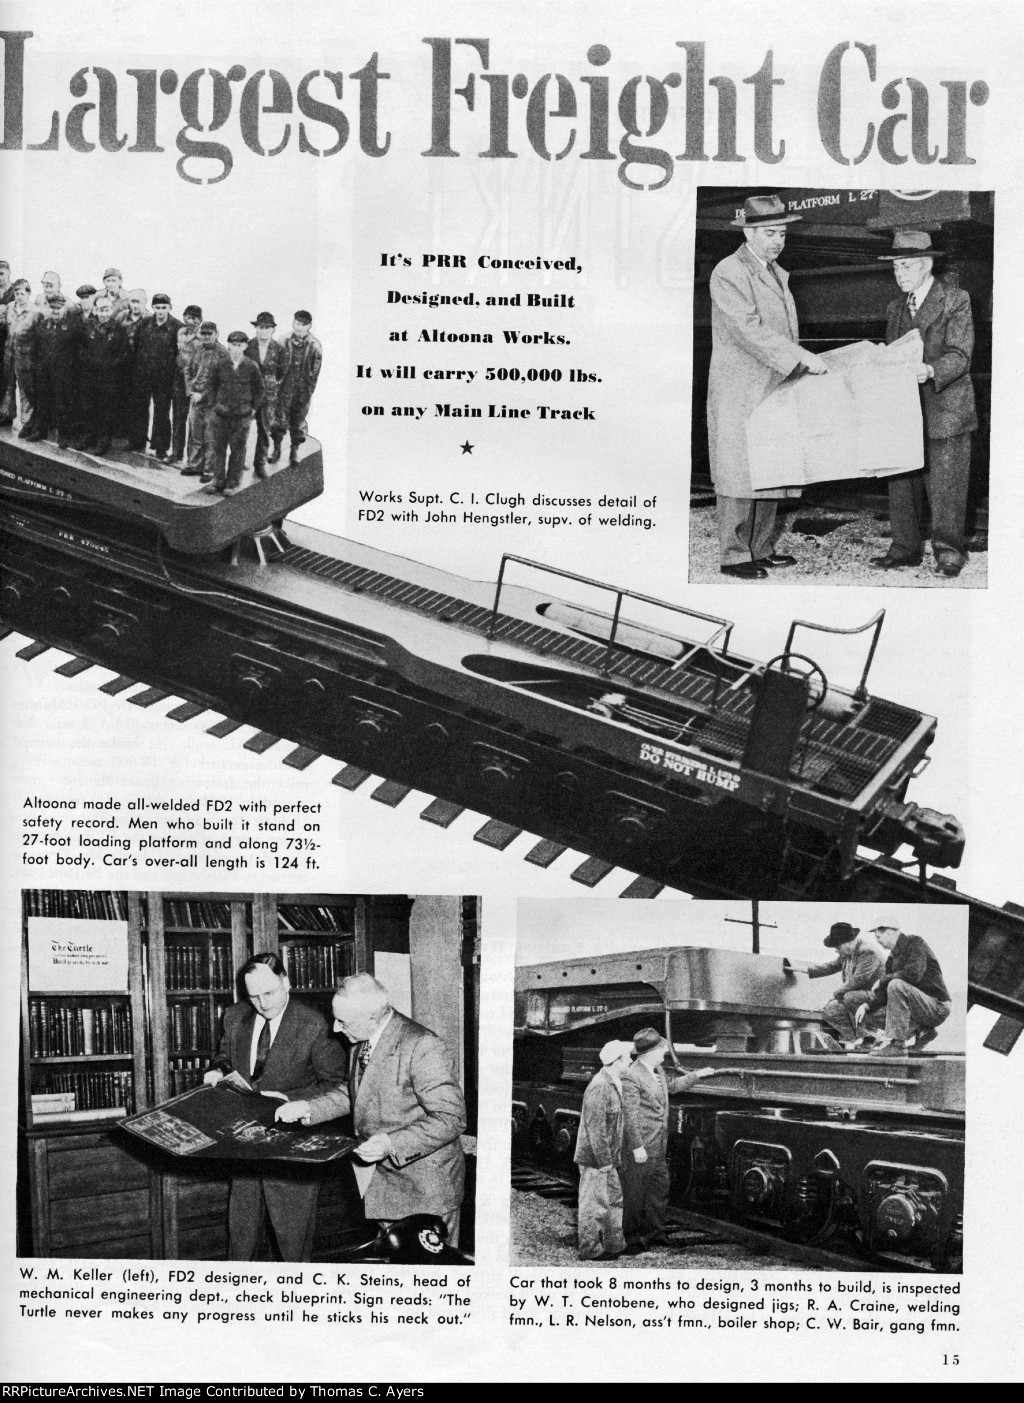 "Worlds Largest Freight Car," Page 15, 1952